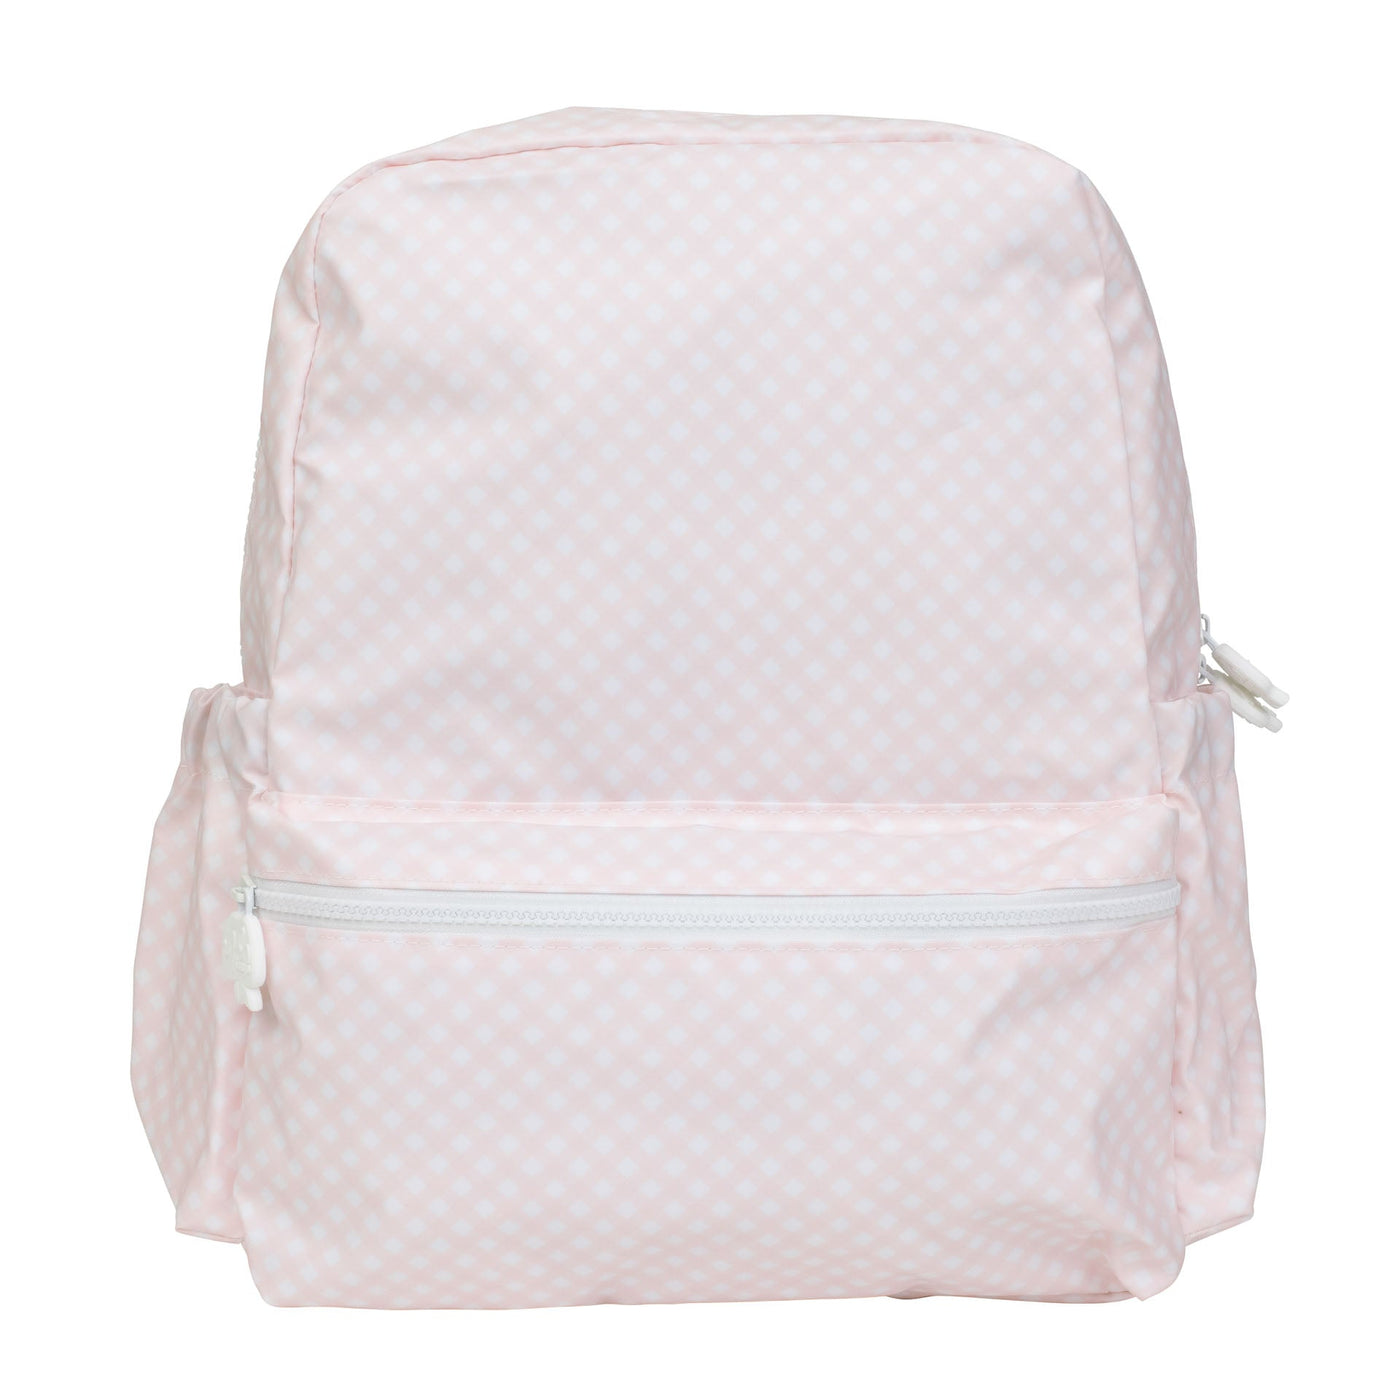 The Large Backpack - Pink Gingham